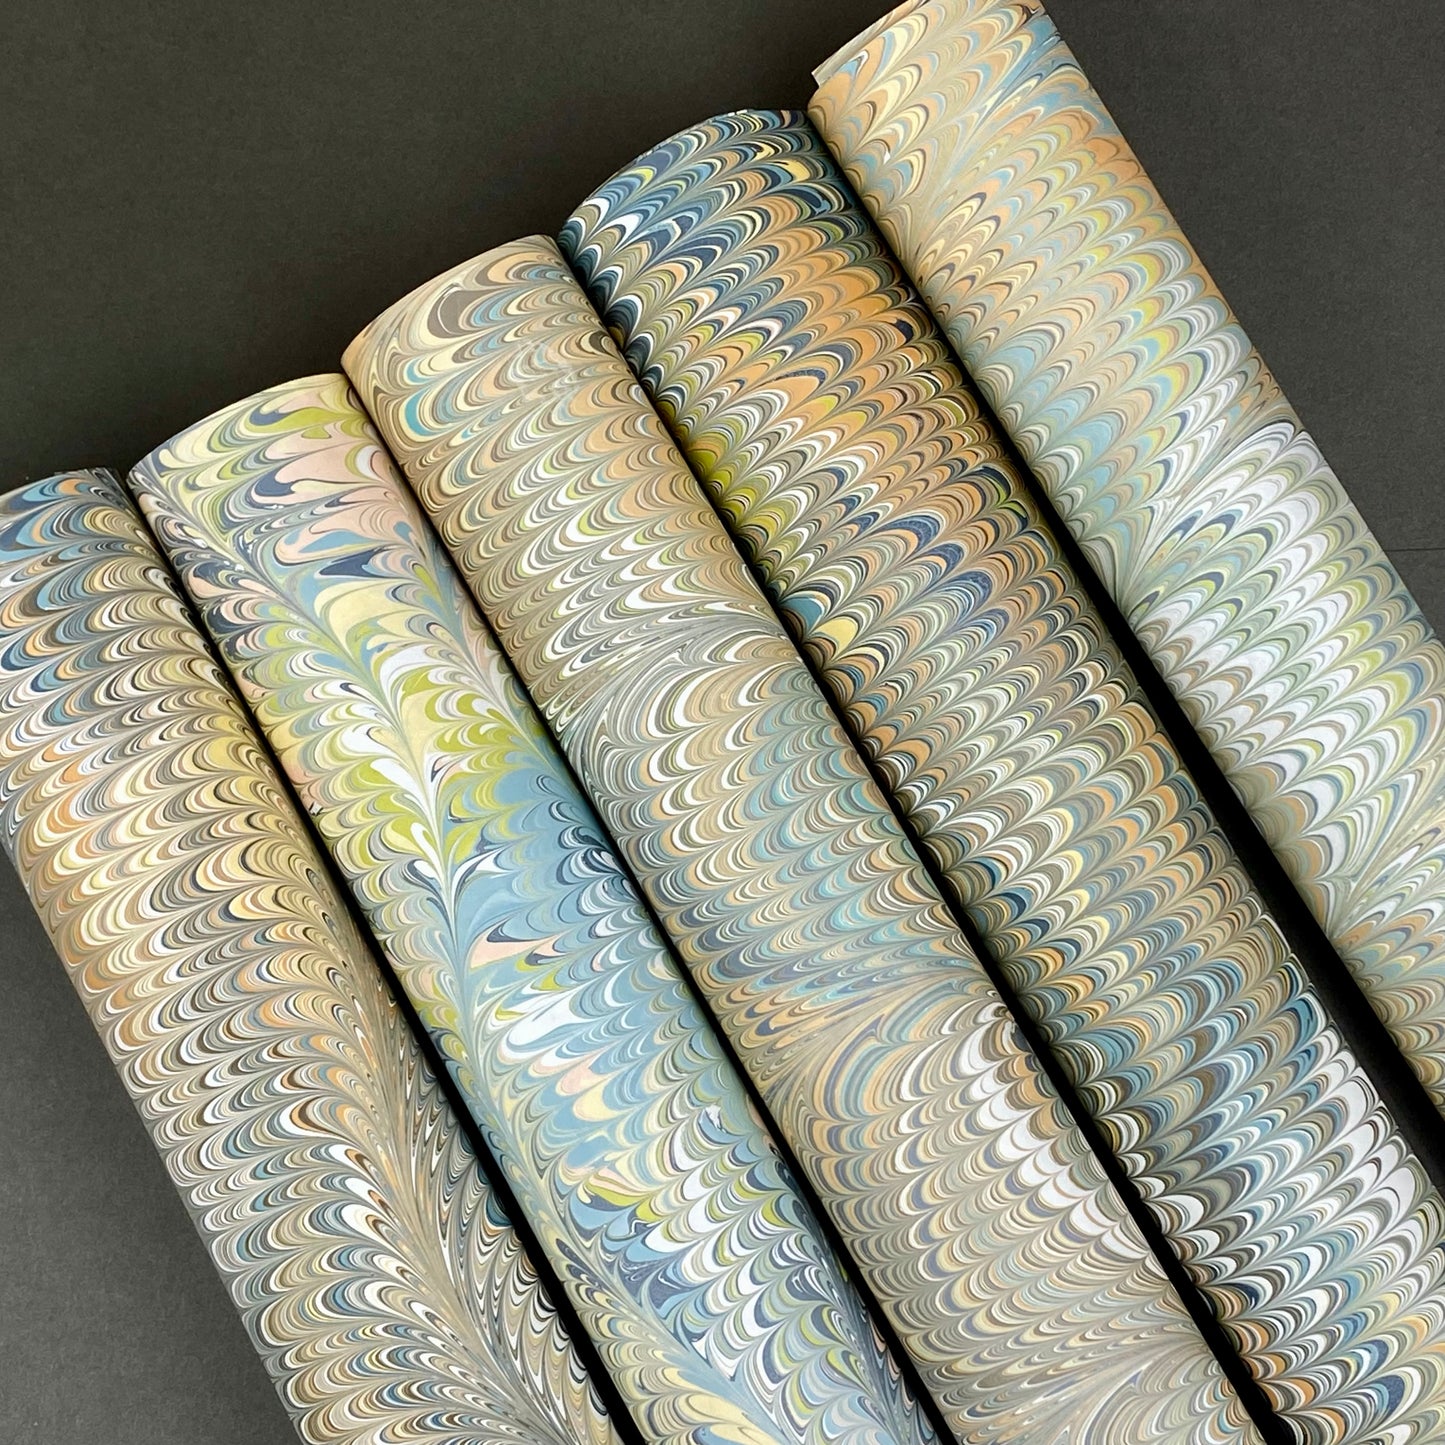 Paper Marbling Workshop - All Day - Various Dates